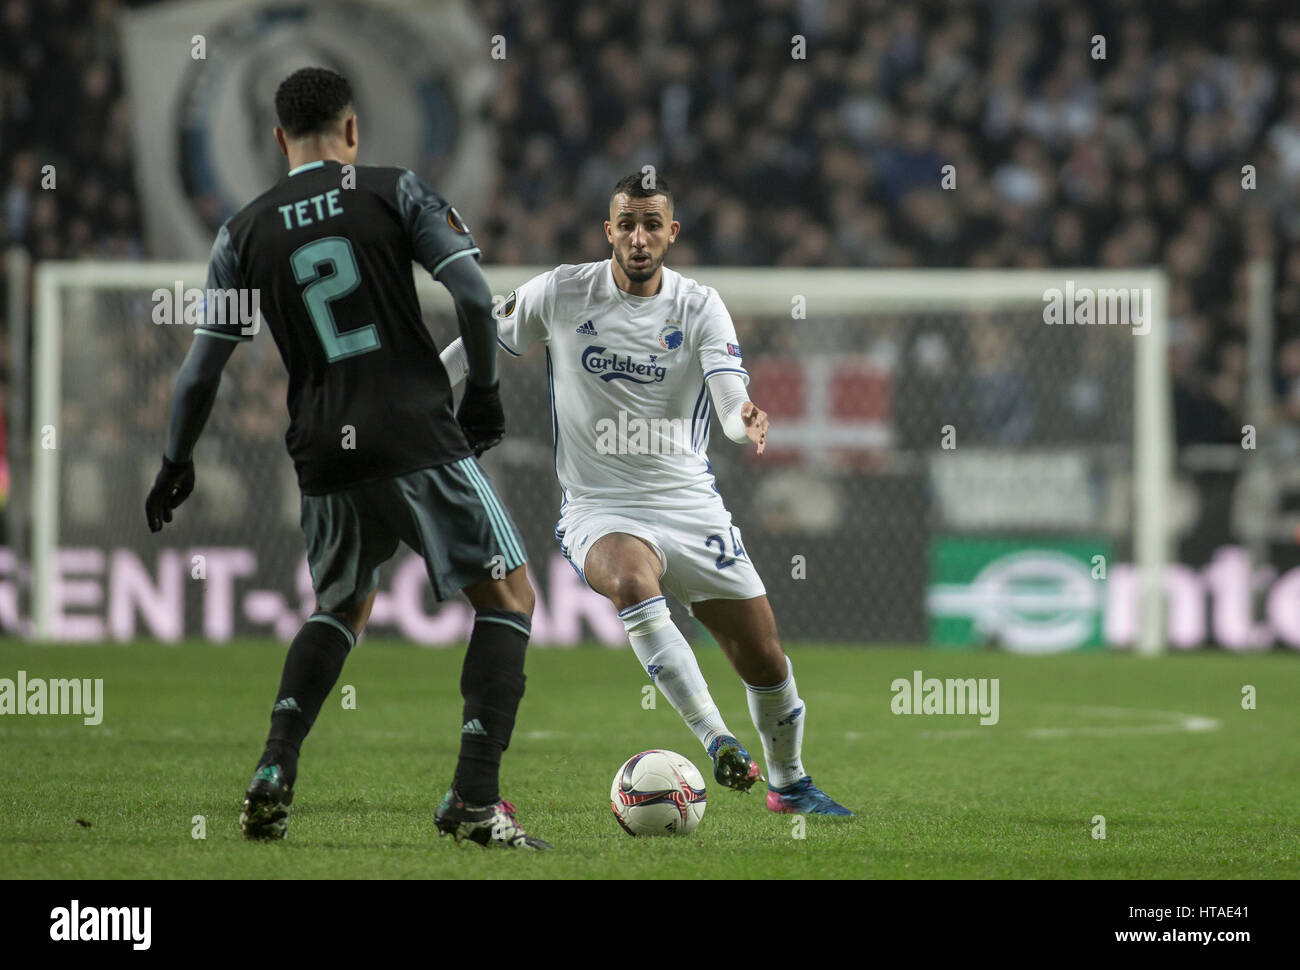 Denmark, Copenhagen, March 9th 2017. Youssef Toutouh (R) of FC Copenhagen is up against Kenny Tete (2) during the Europa League round of 16 match between FC Copenhagen and Ajax Amsterdam at Telia Parken. Stock Photo